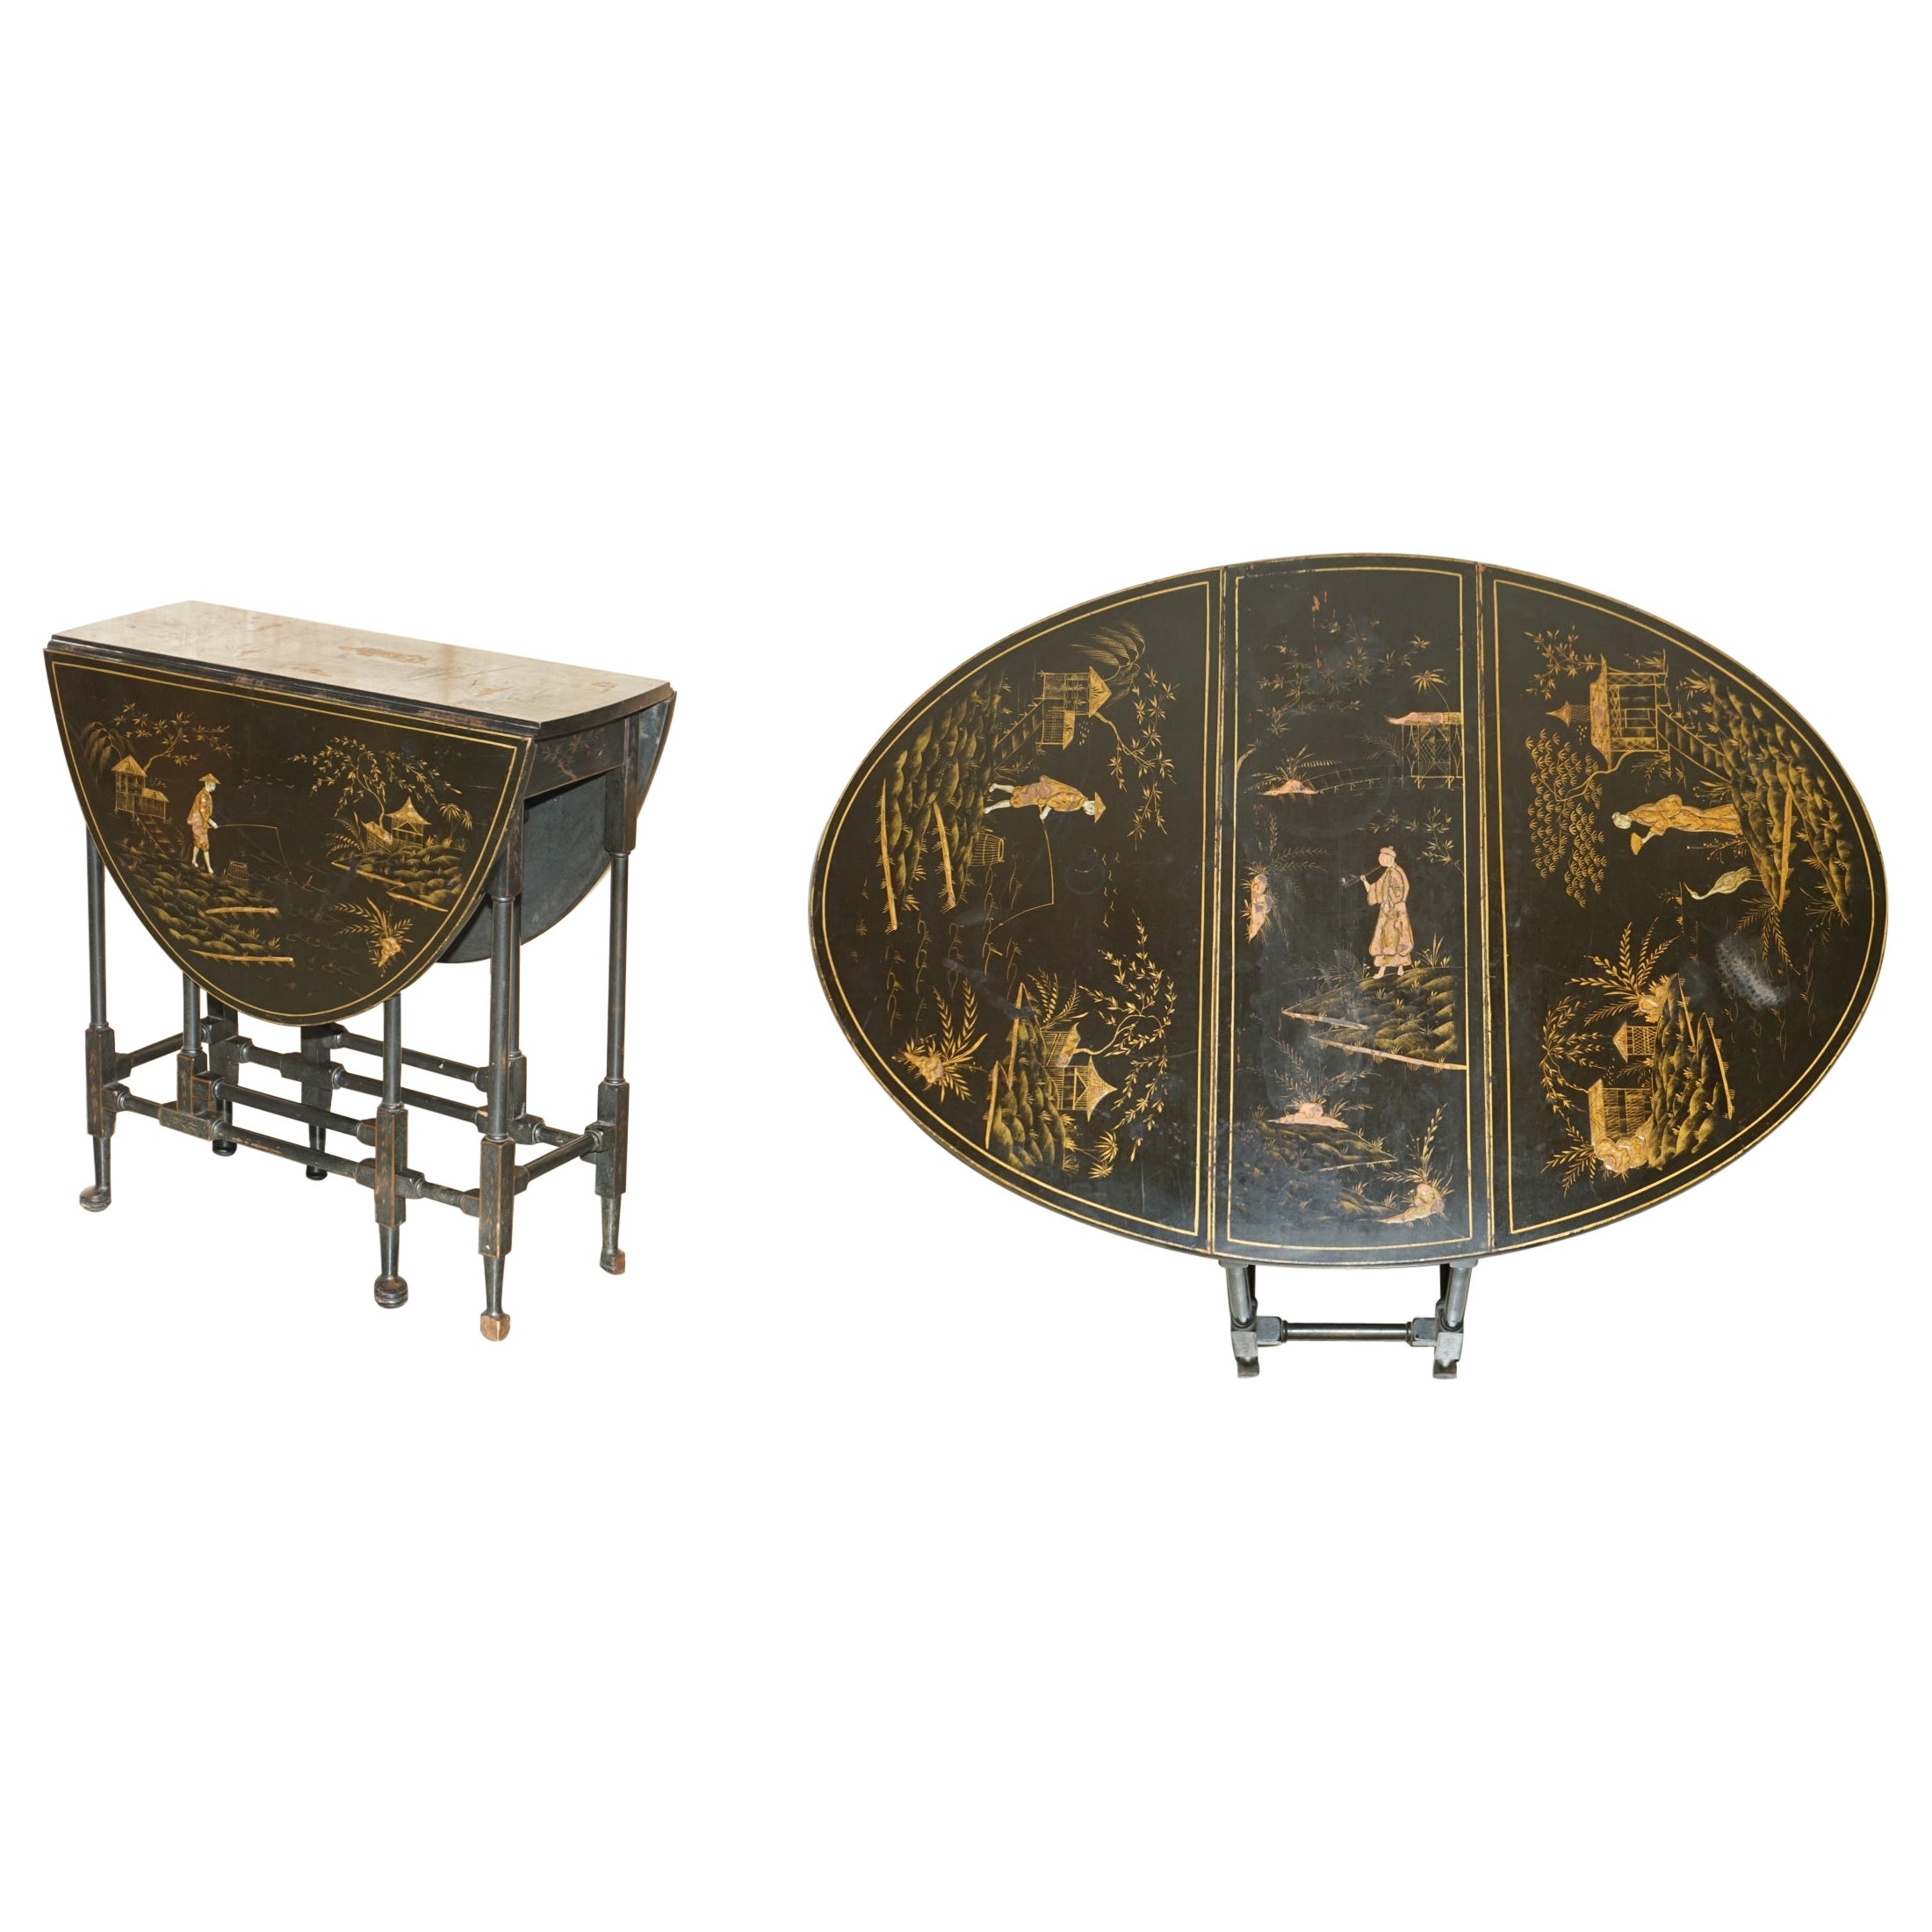 Fine Antique circa 1880 Chinese Chinoiserie Lacquered Gateleg Sutherland Table For Sale